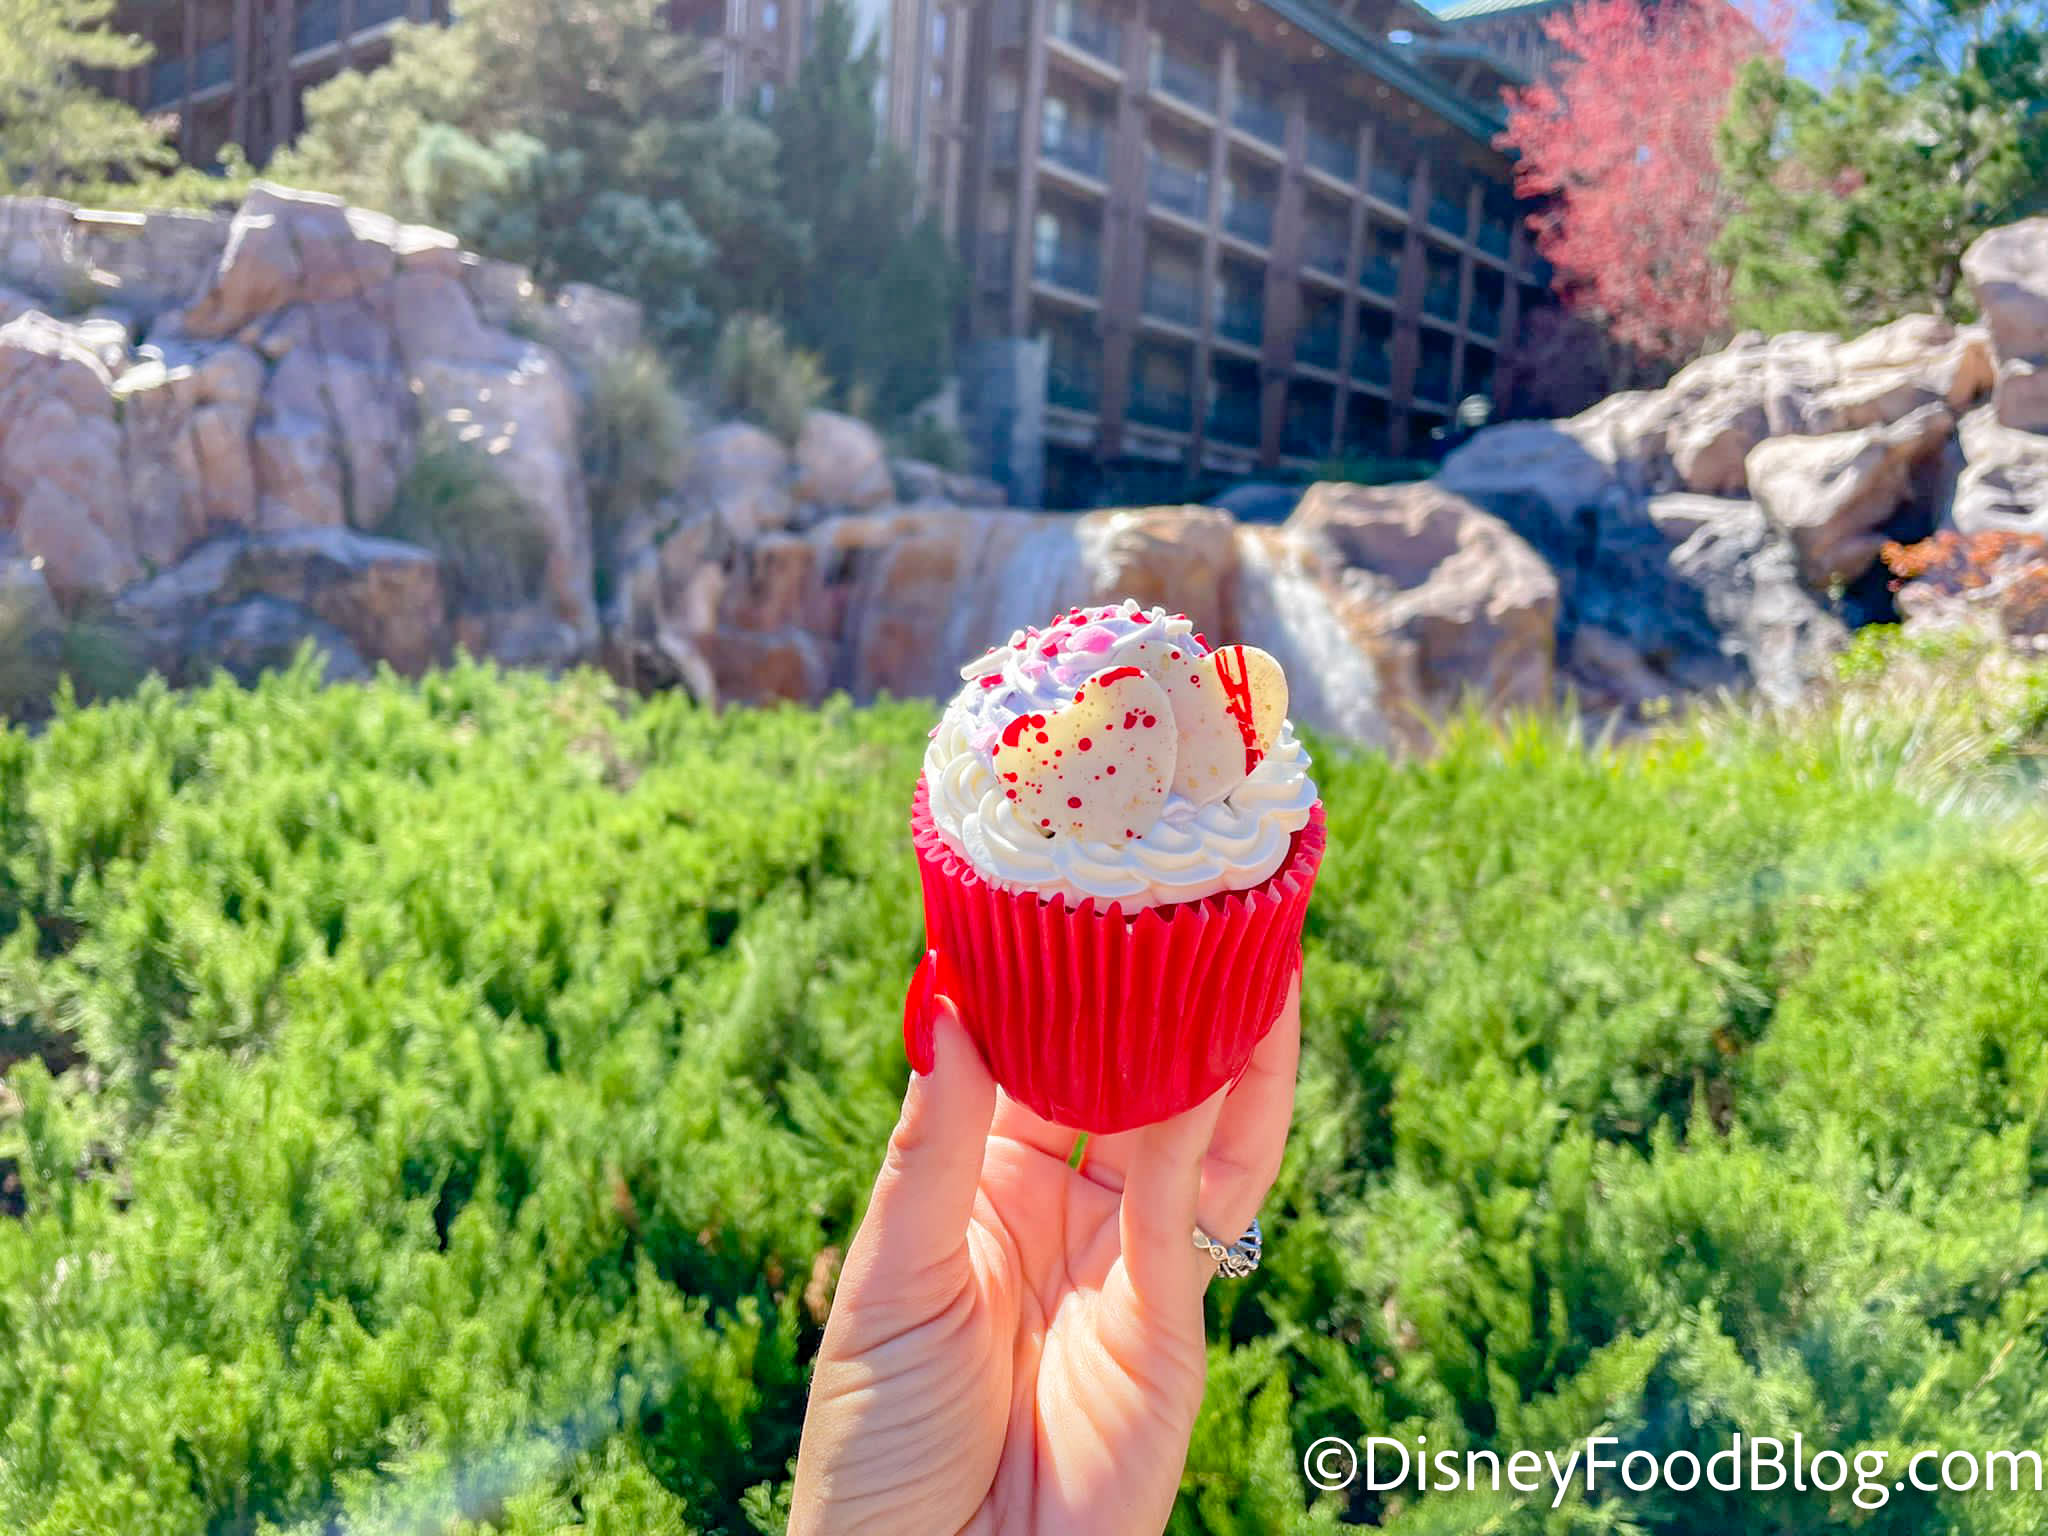 Will You Make it to Disney World in Time to Try One of the BEST Cupcakes?!